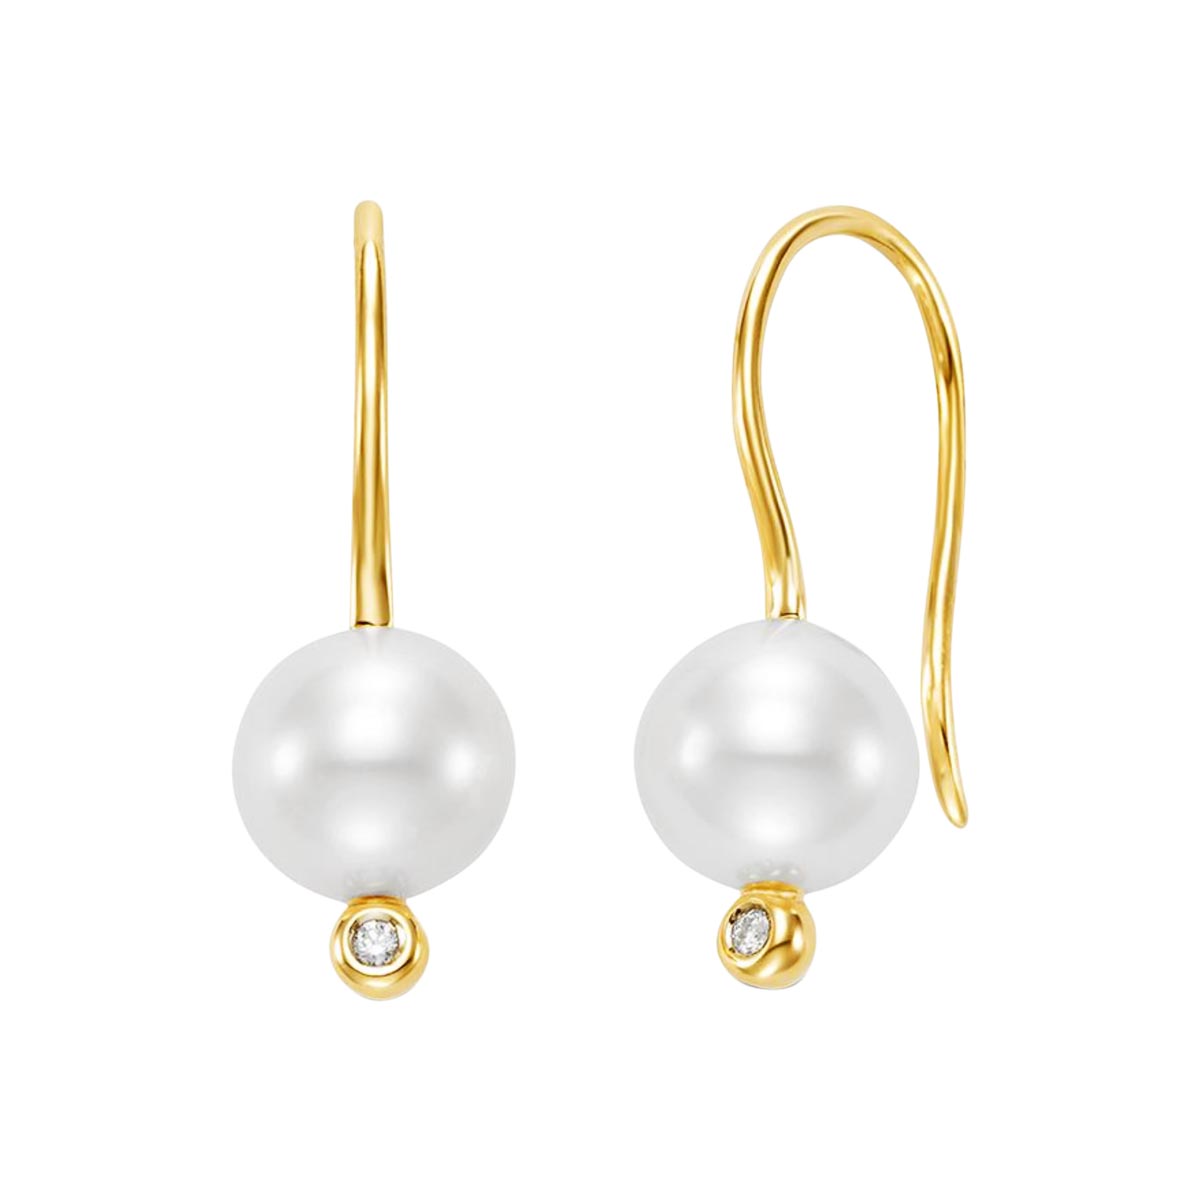 Mastoloni Cultured Freshwater Pearl Dangle Earrings in 14kt White Gold with Diamonds (8-8.5mm pearls and .02ct tw)